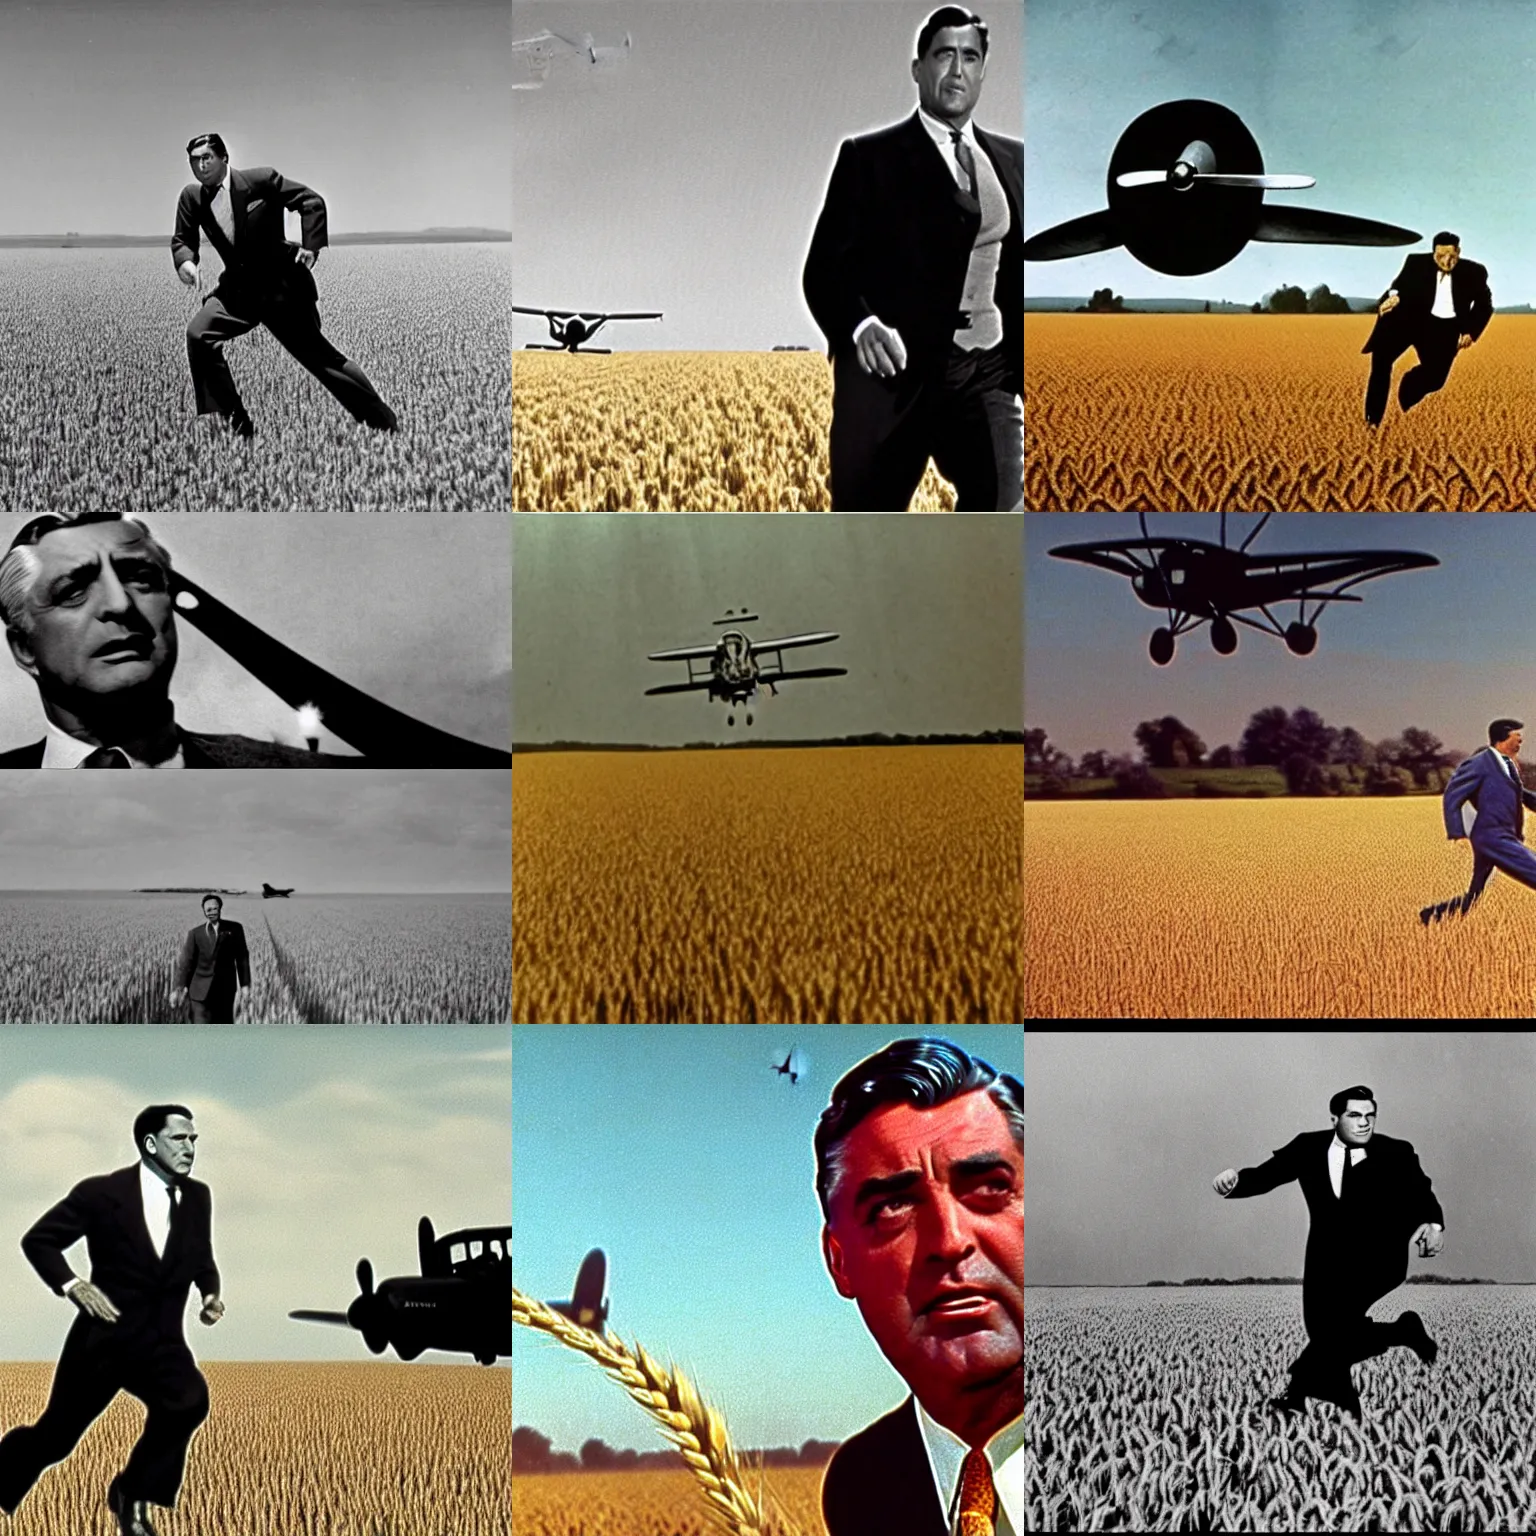 Prompt: scene from a film by hitchcock with a close - up of the face of cary grant running from a plane in a wheat field. in the background, the plane is a biplan with visible propellers and close to the ground. technicolor, 5 0 mm, hyperrealistic, extremely realistic face, highly detailed, highly intricate.